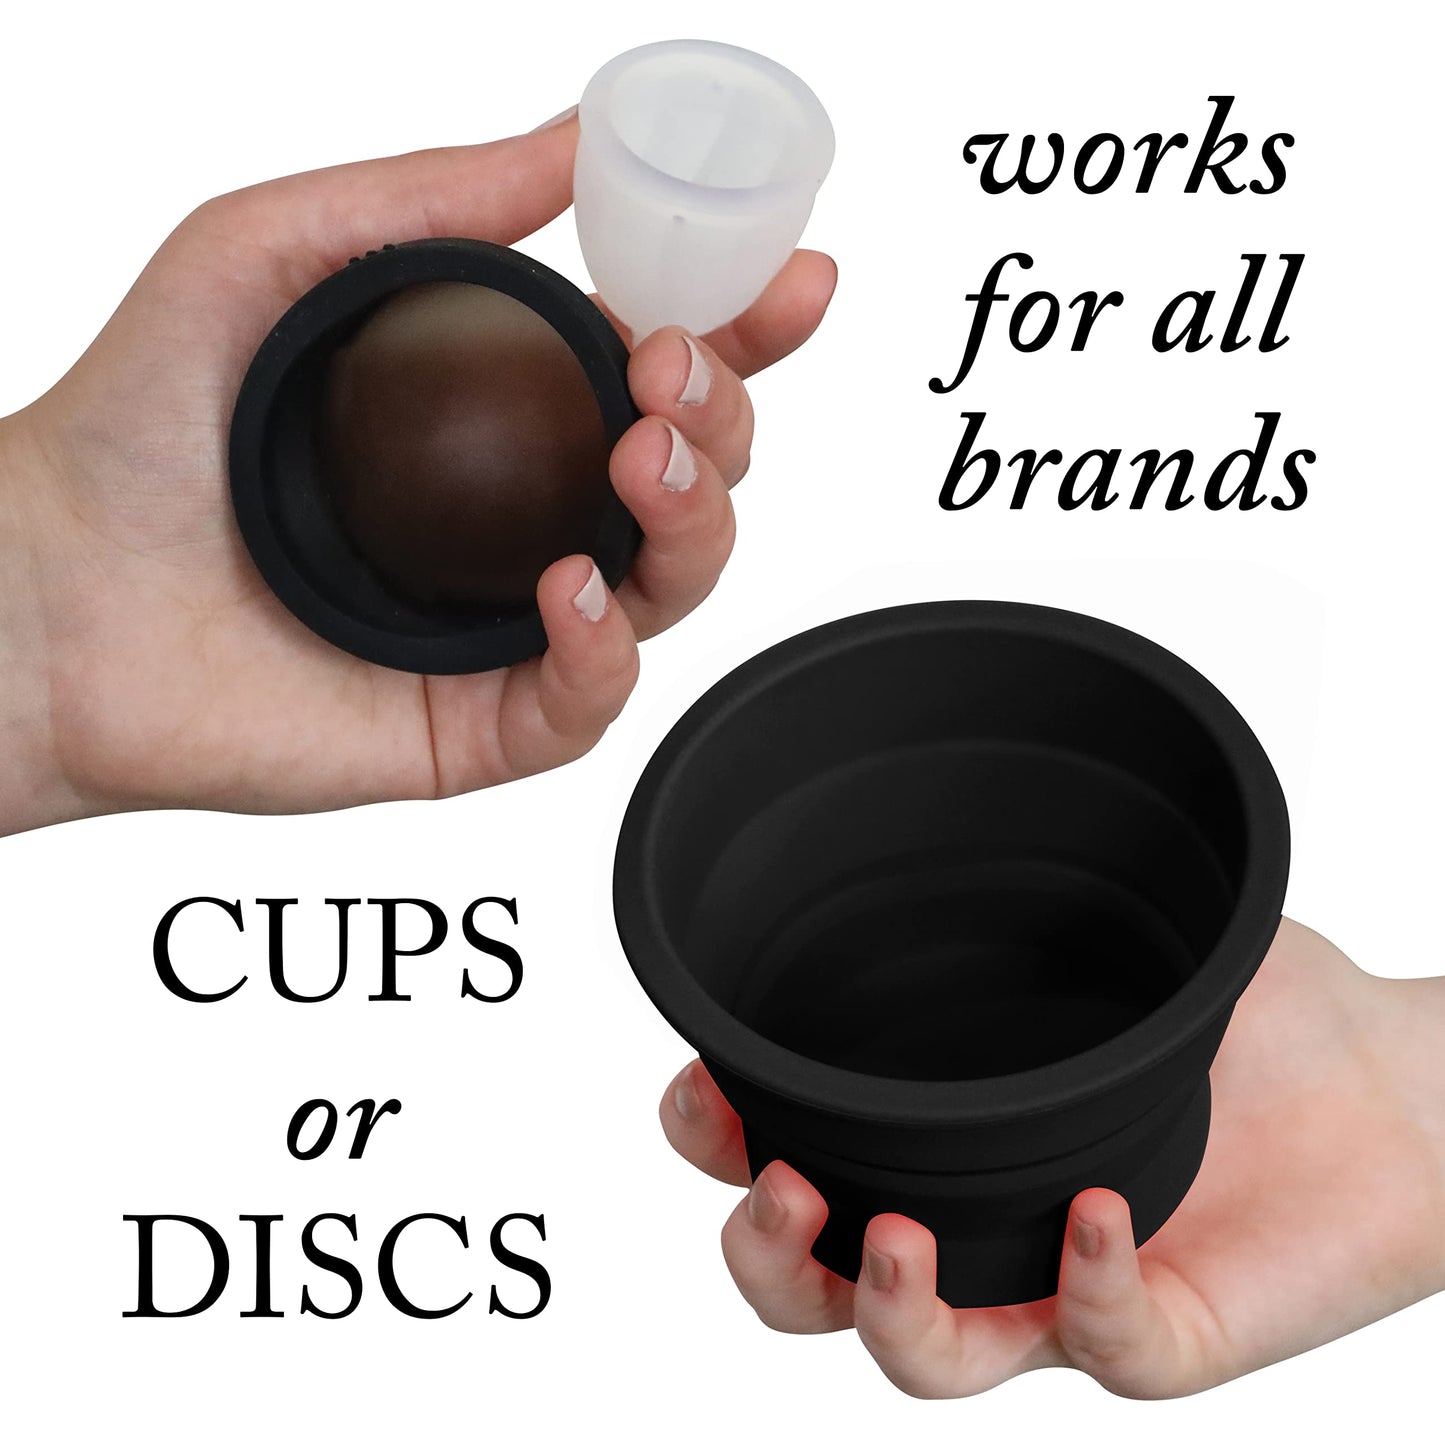 MOONTHLIES Menstrual Cup Sterilizer, Menstrual Disc Cleaner | Travel Sterilizer | Collapsible Silicone Cleaner Case to Boil, Sterilize + Store Your Period Cups / Discs (Black)